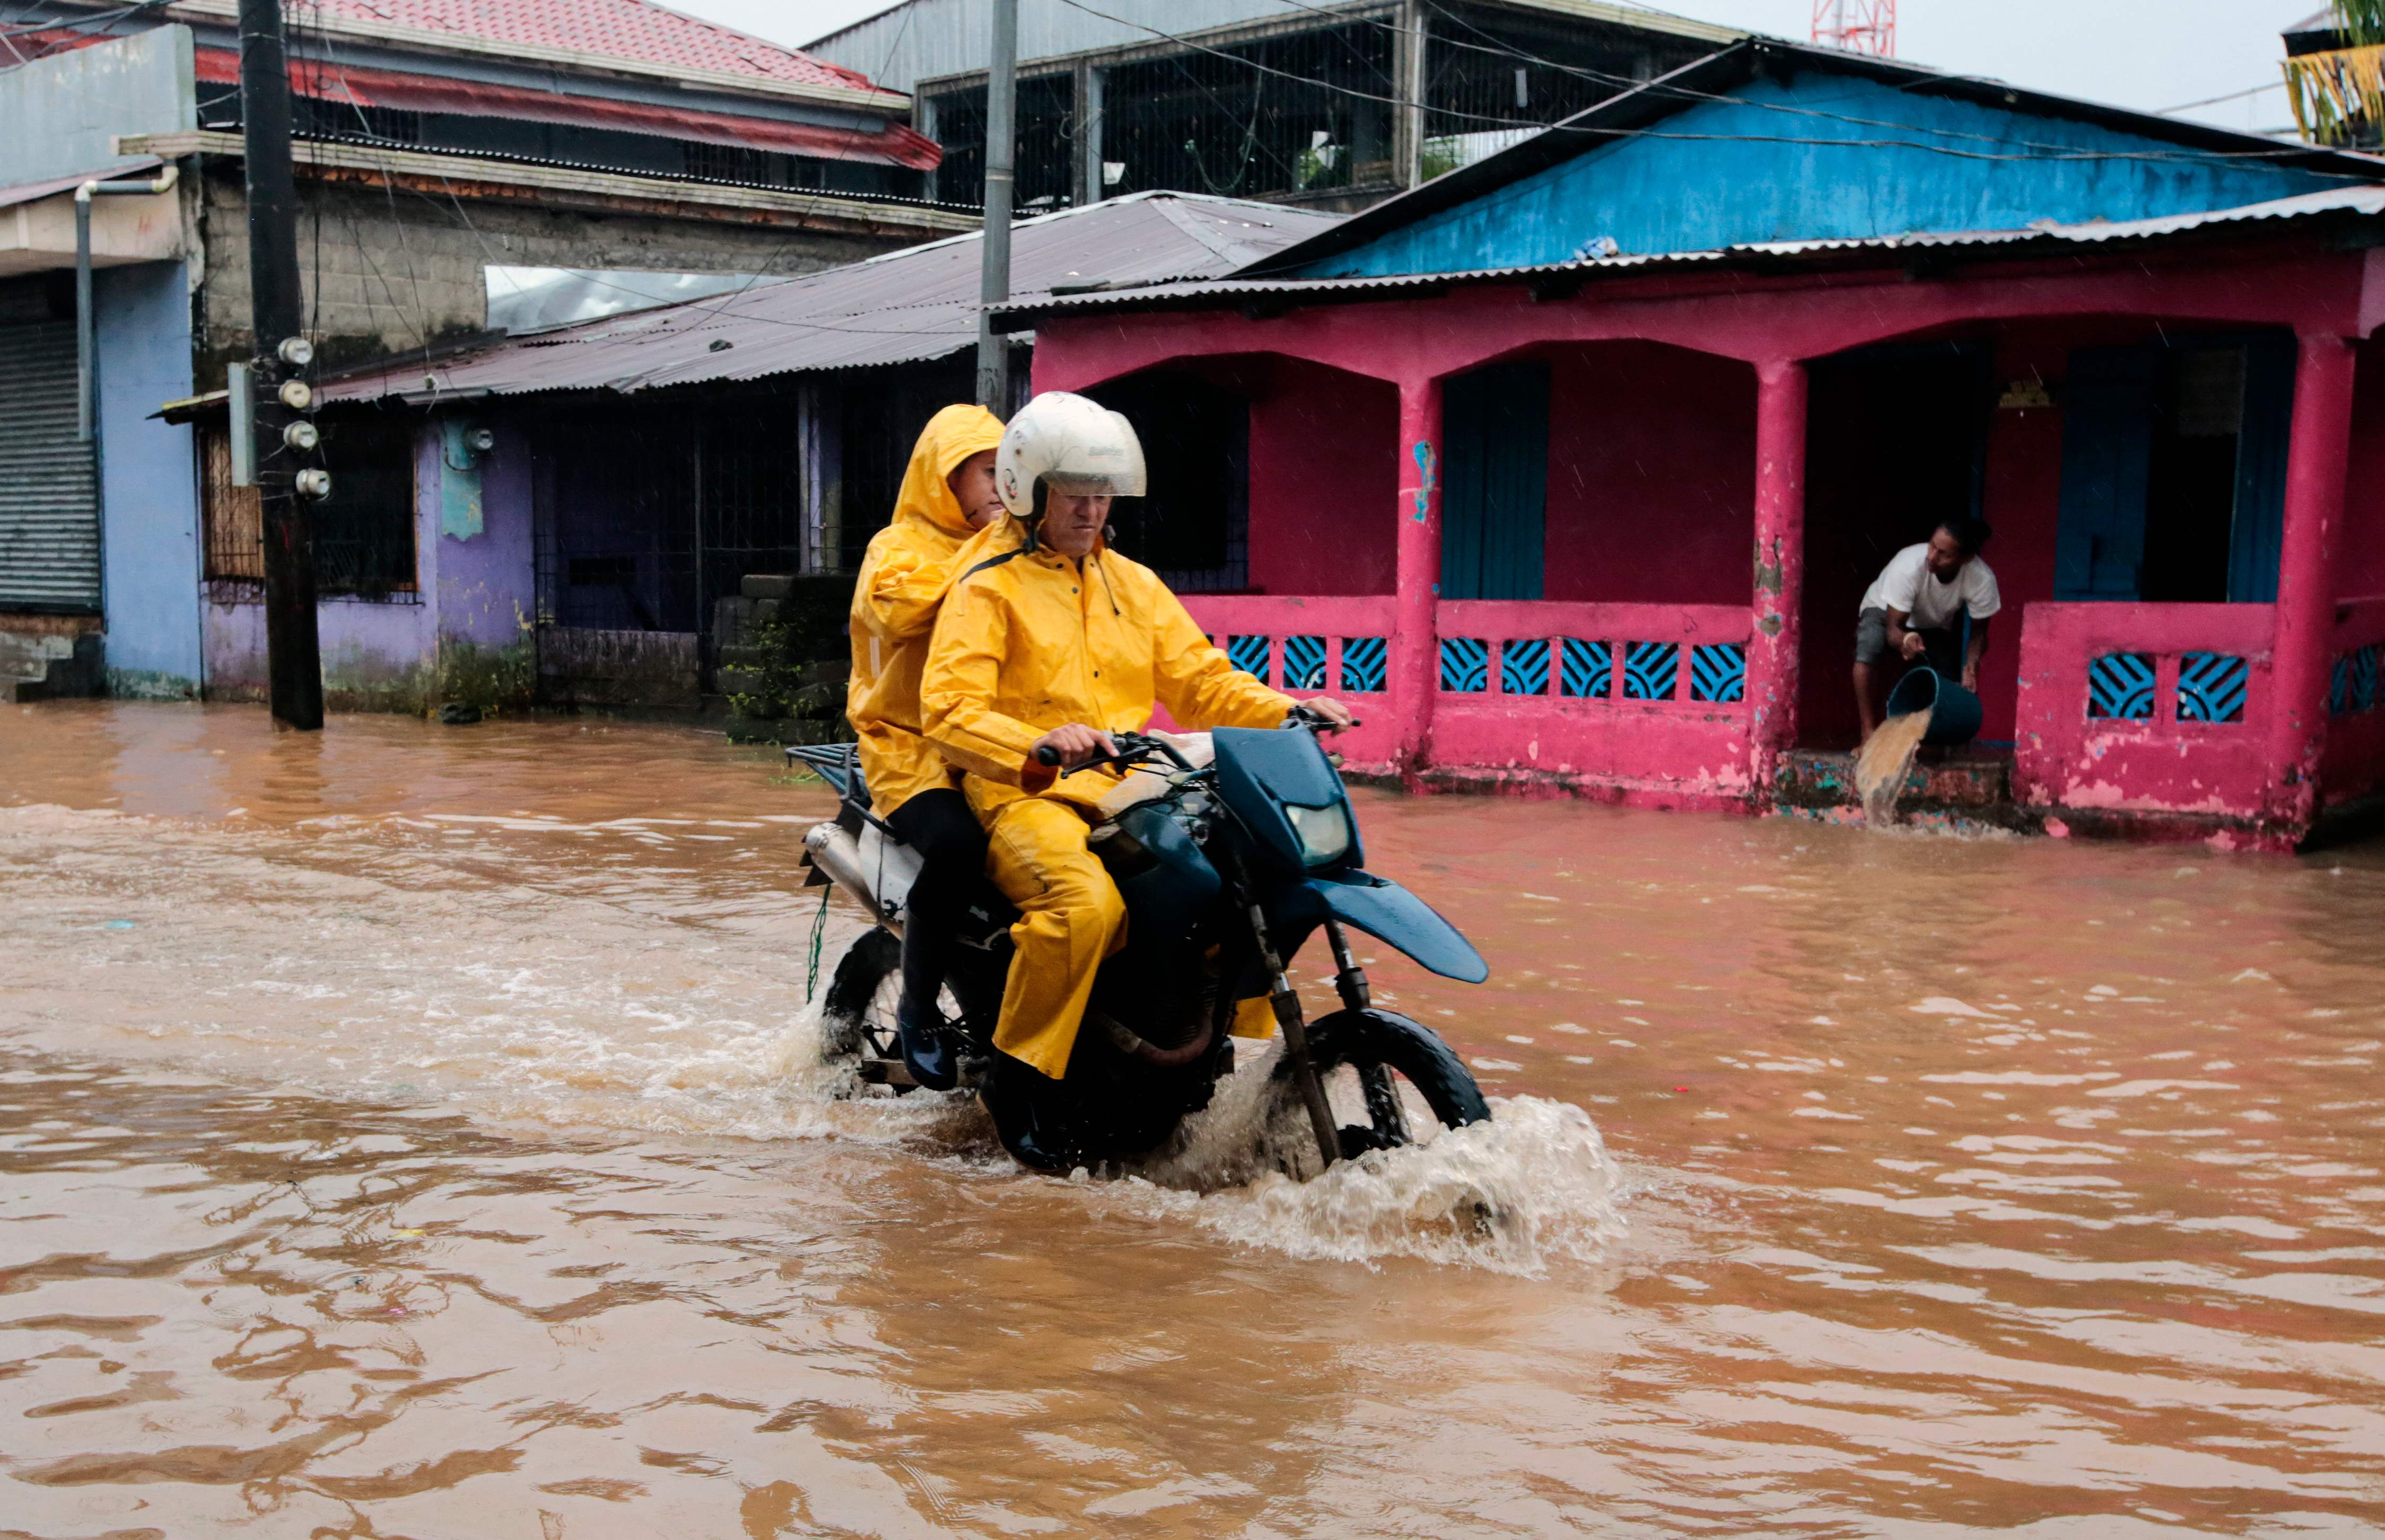 People ride a motorbike through flooded streets in Bluefields, Nicaragua on Sunday